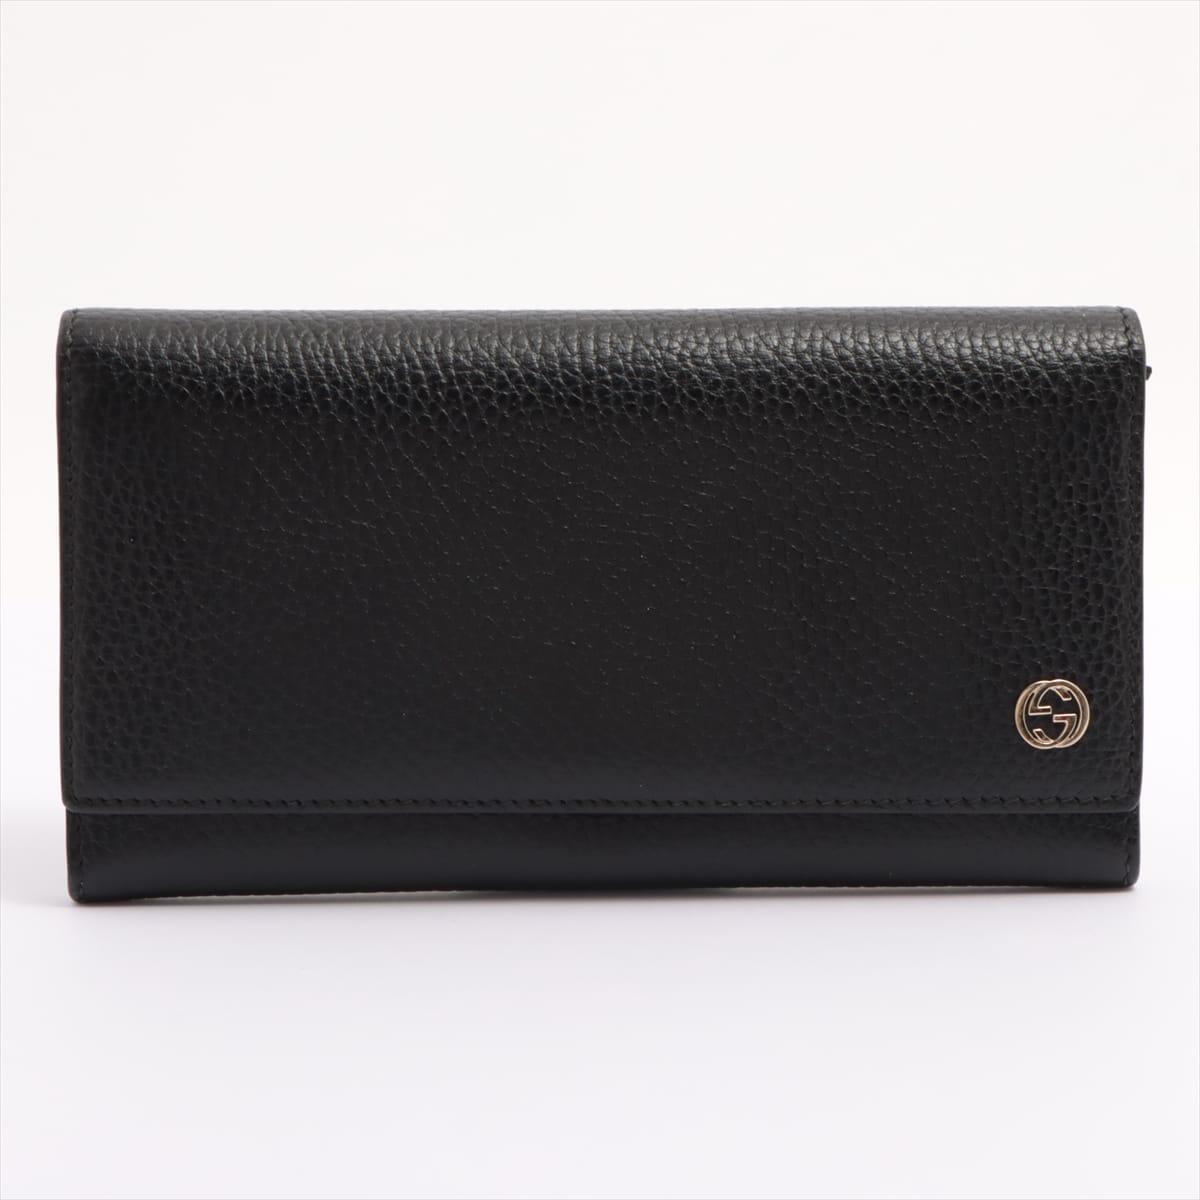 Gucci Interlocking G 449279 Leather Wallet Black There is an outlet mark